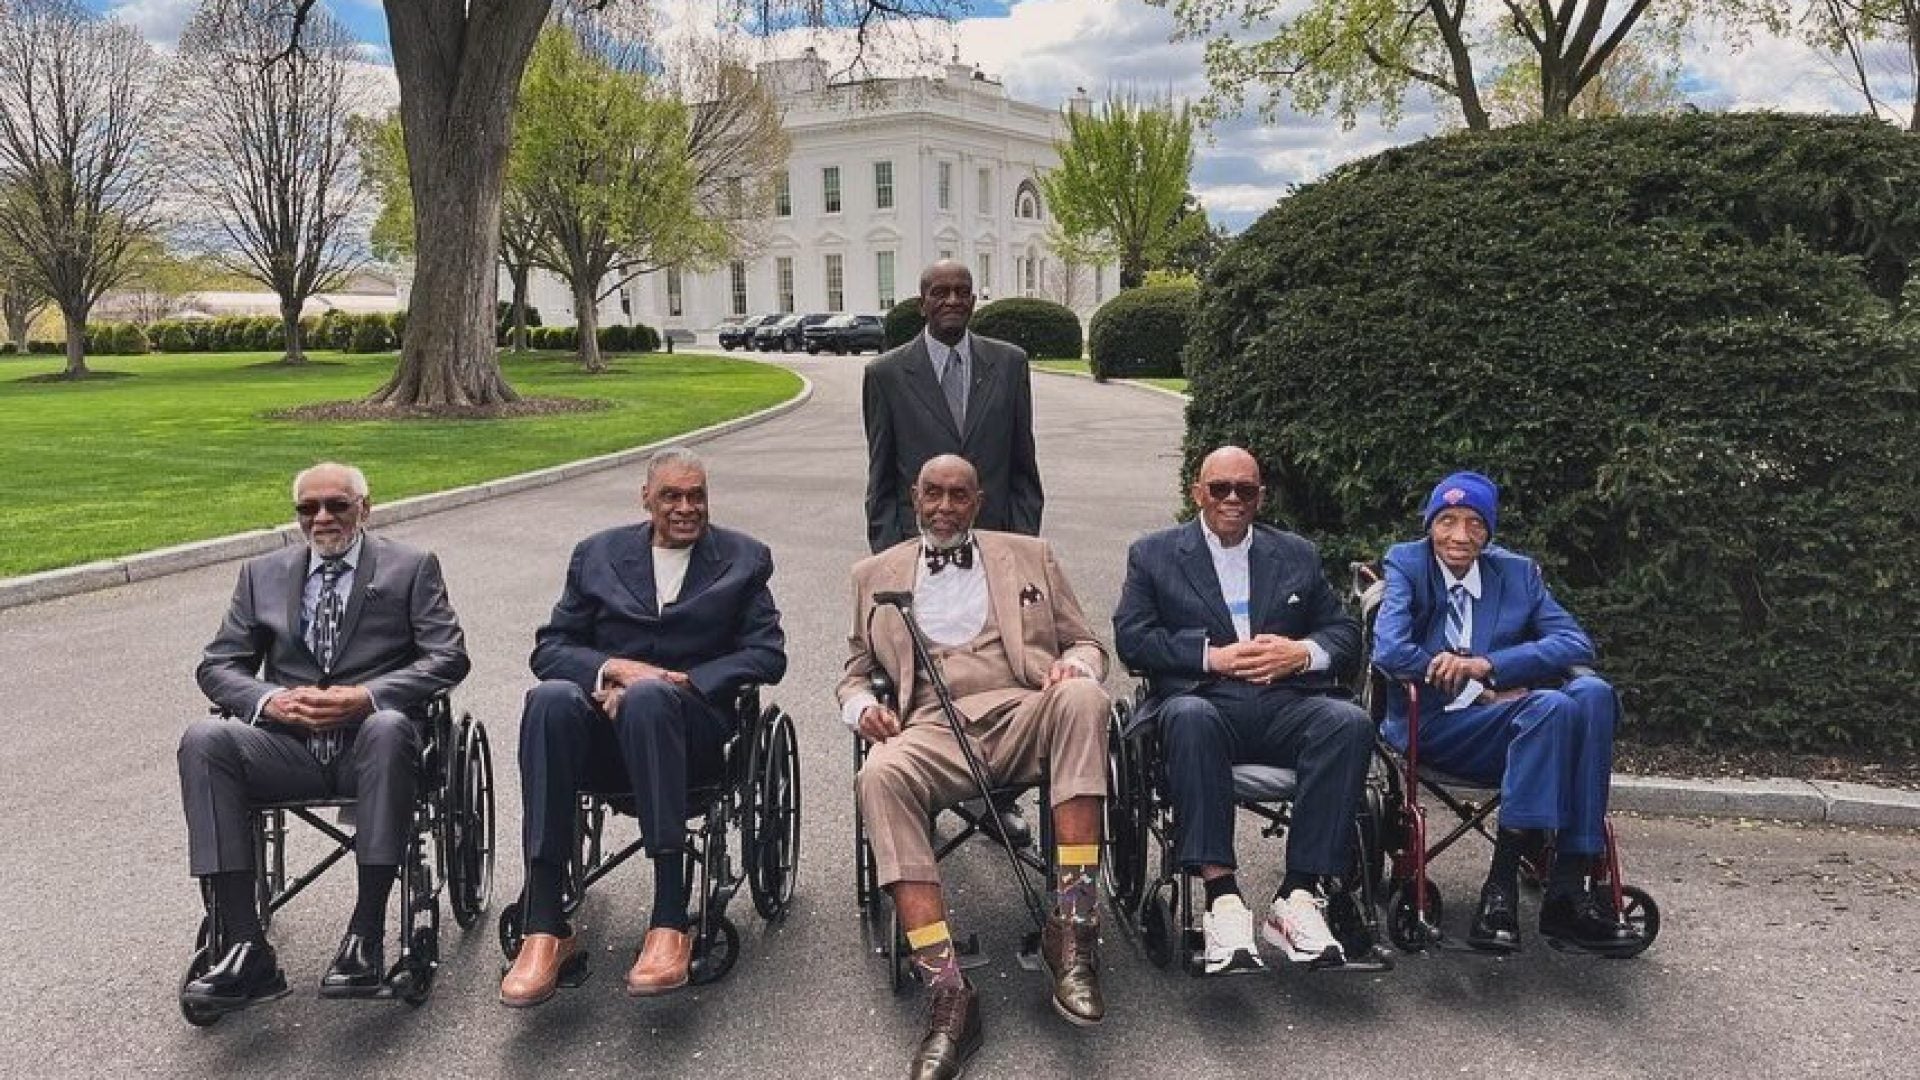 A Championship HBCU Basketball Team Finally Gets Their White House Moment More Than 65 Years After Their Victory